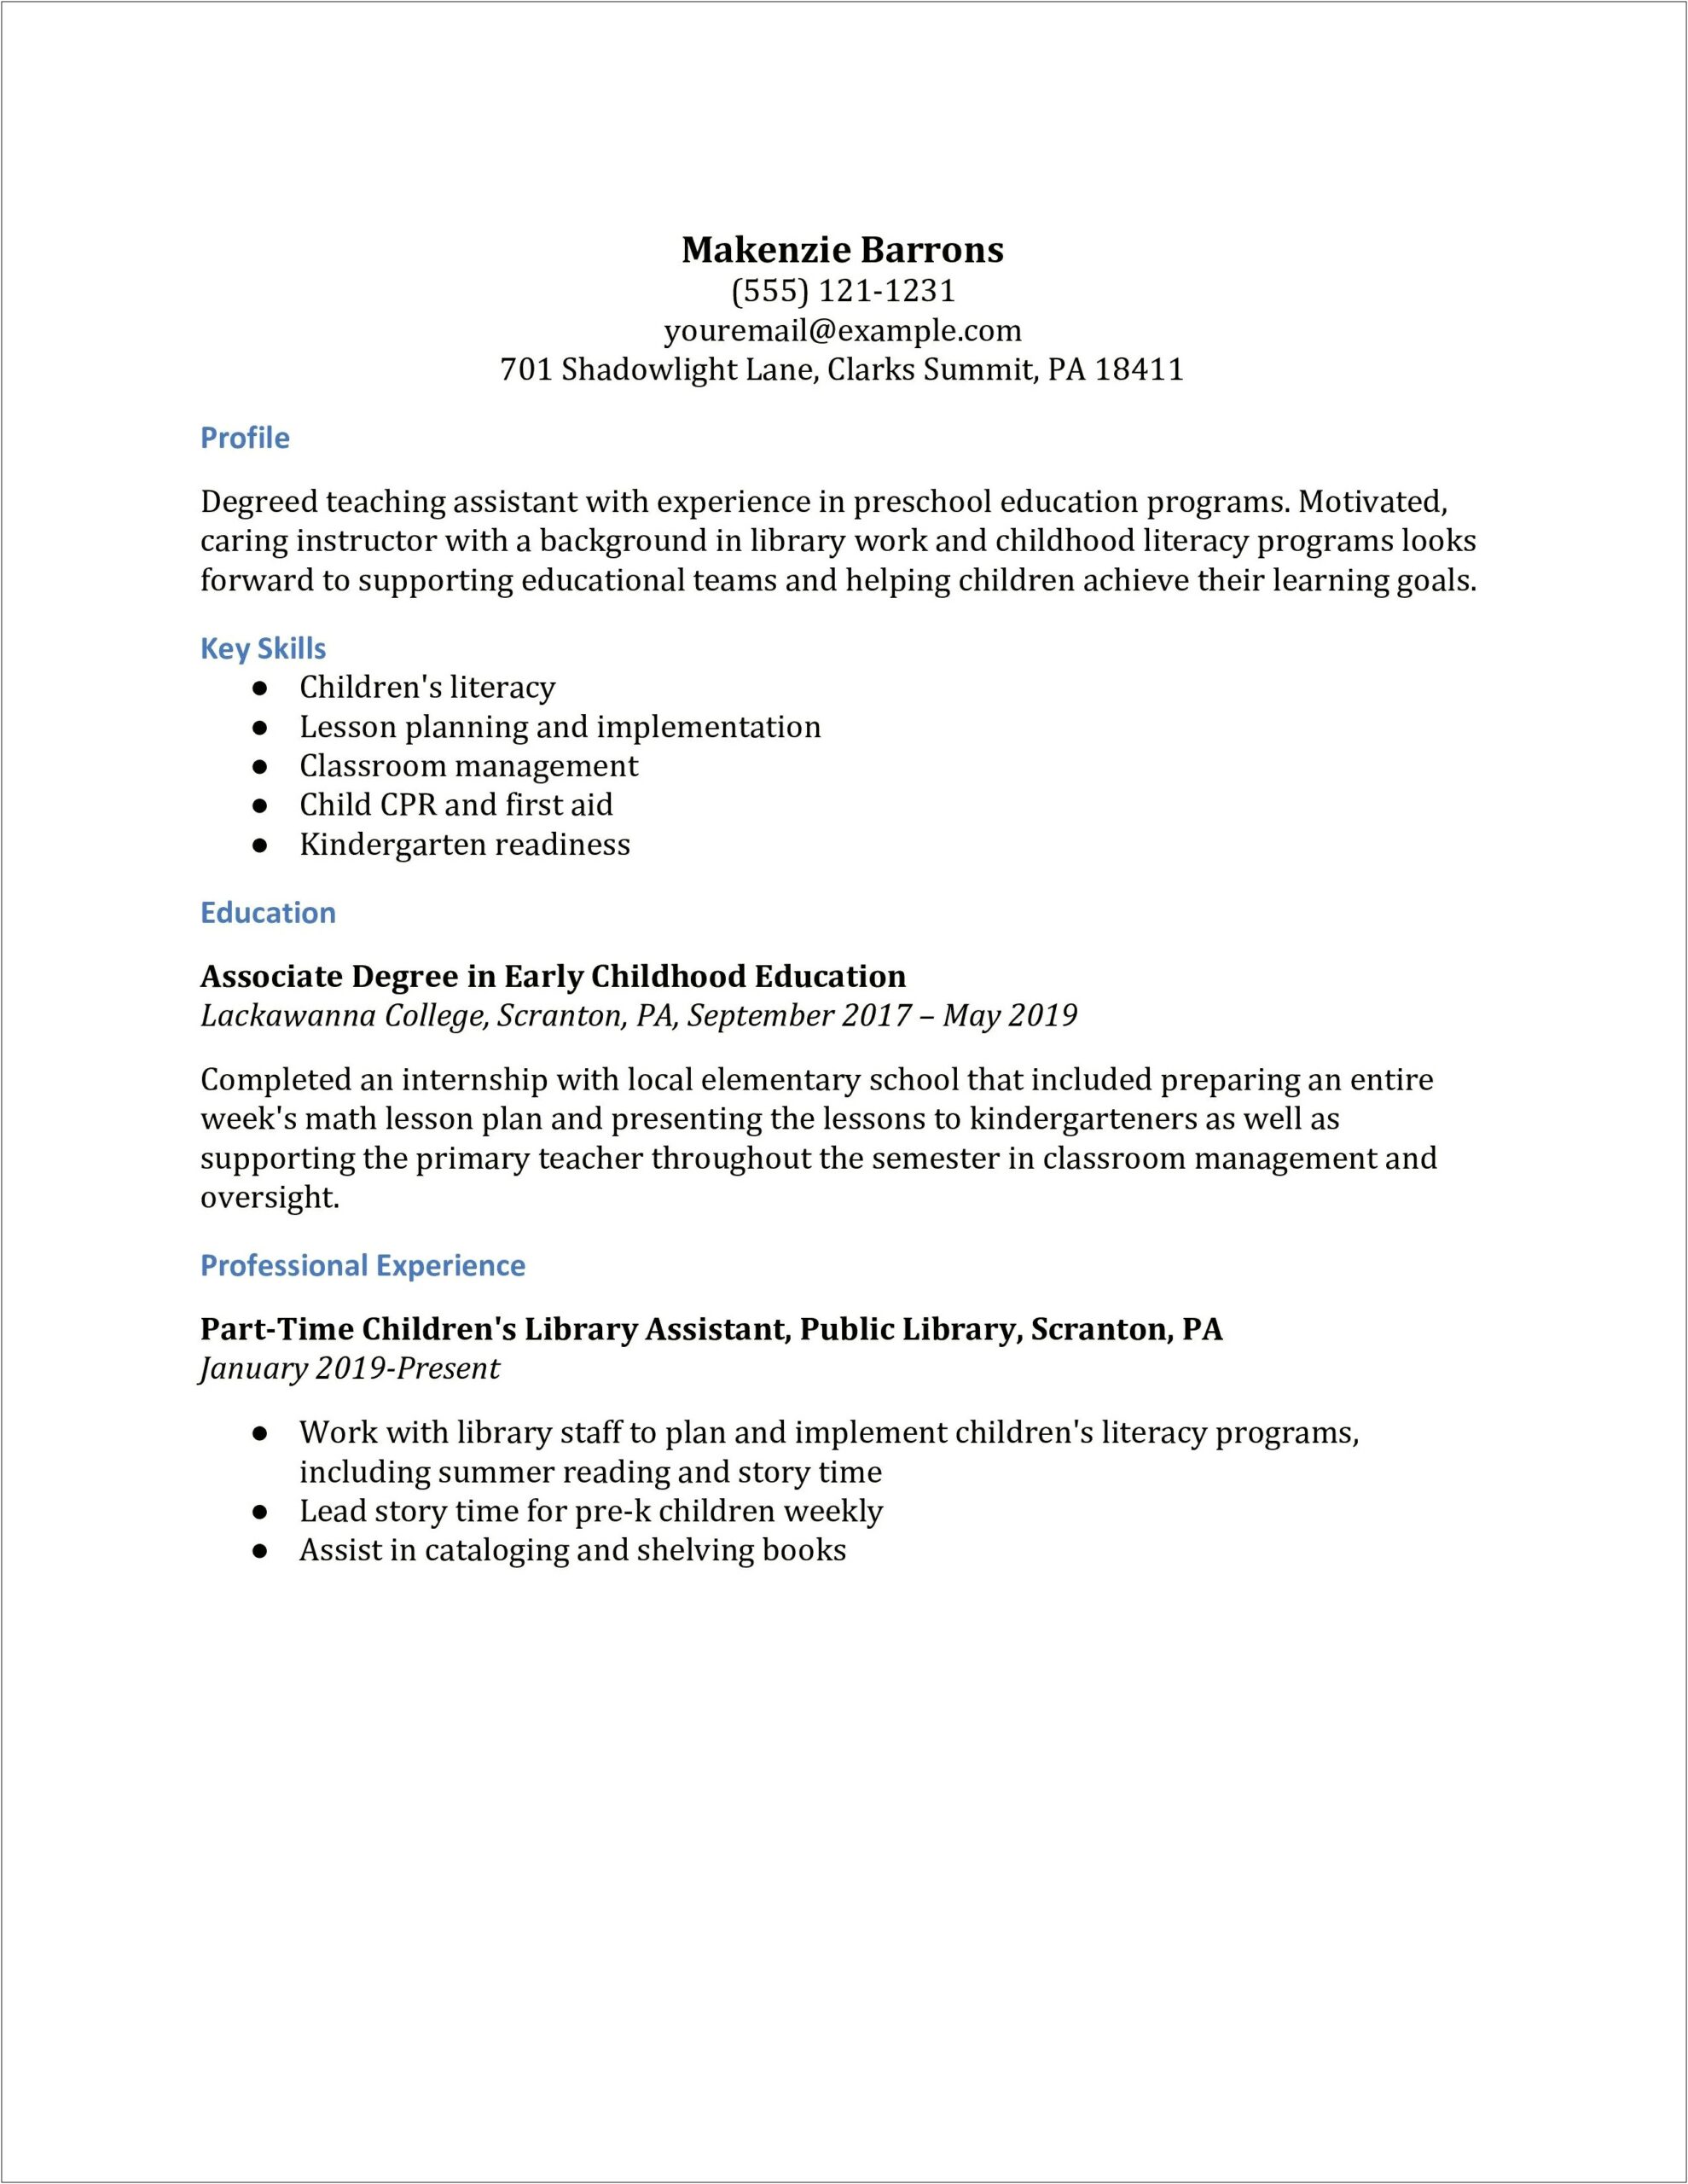 Resume For Preschool Teachers With No Experience